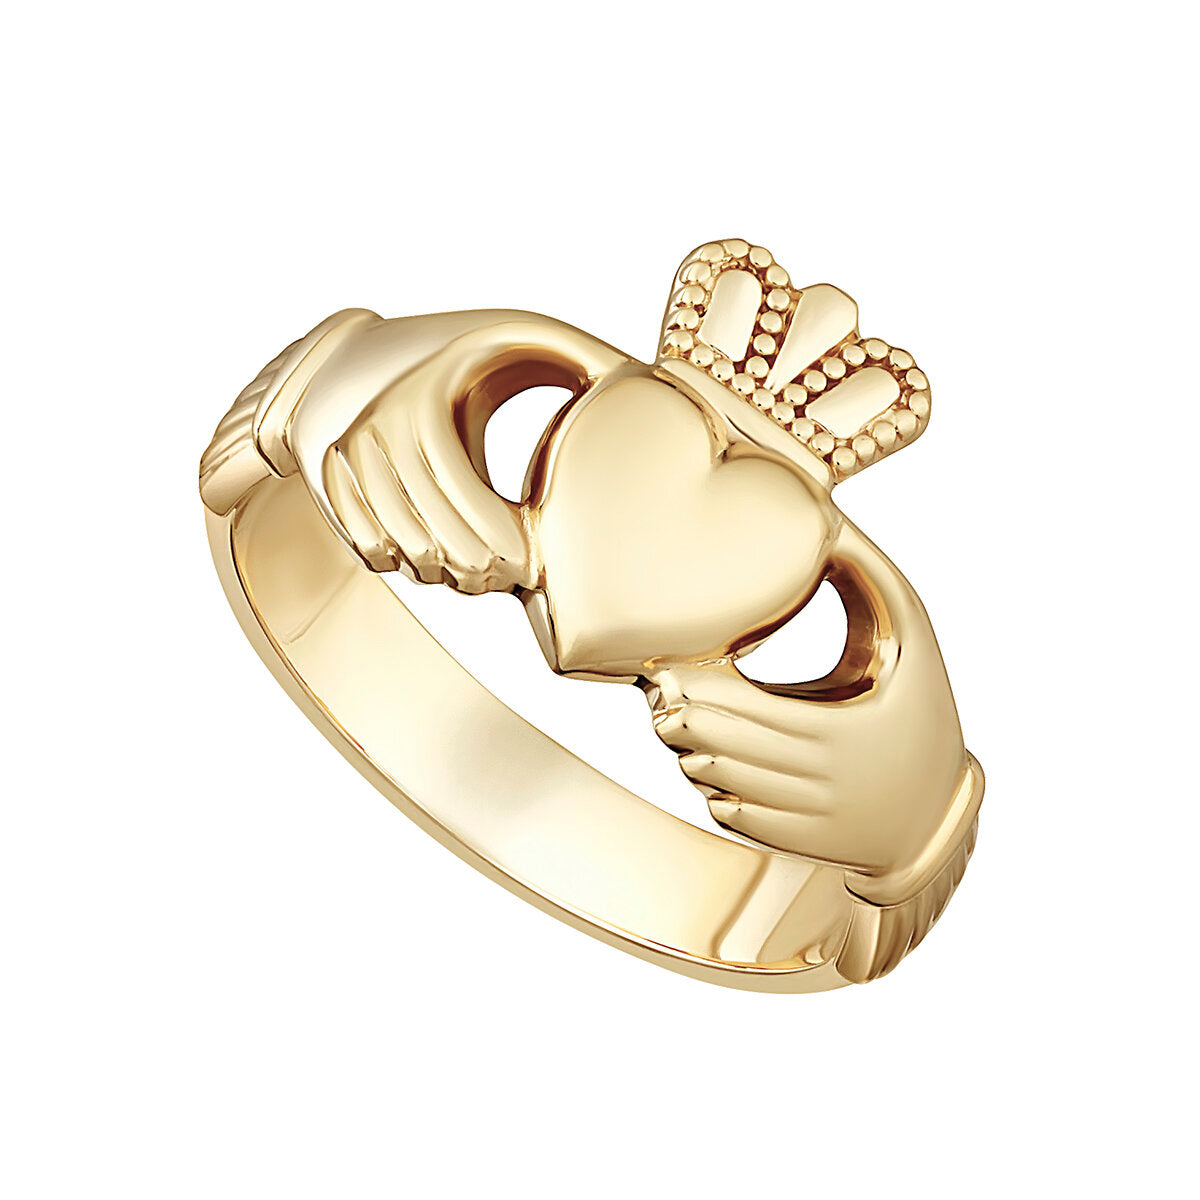 Men's 14ct Yellow Gold Claddagh Ring - Heavy